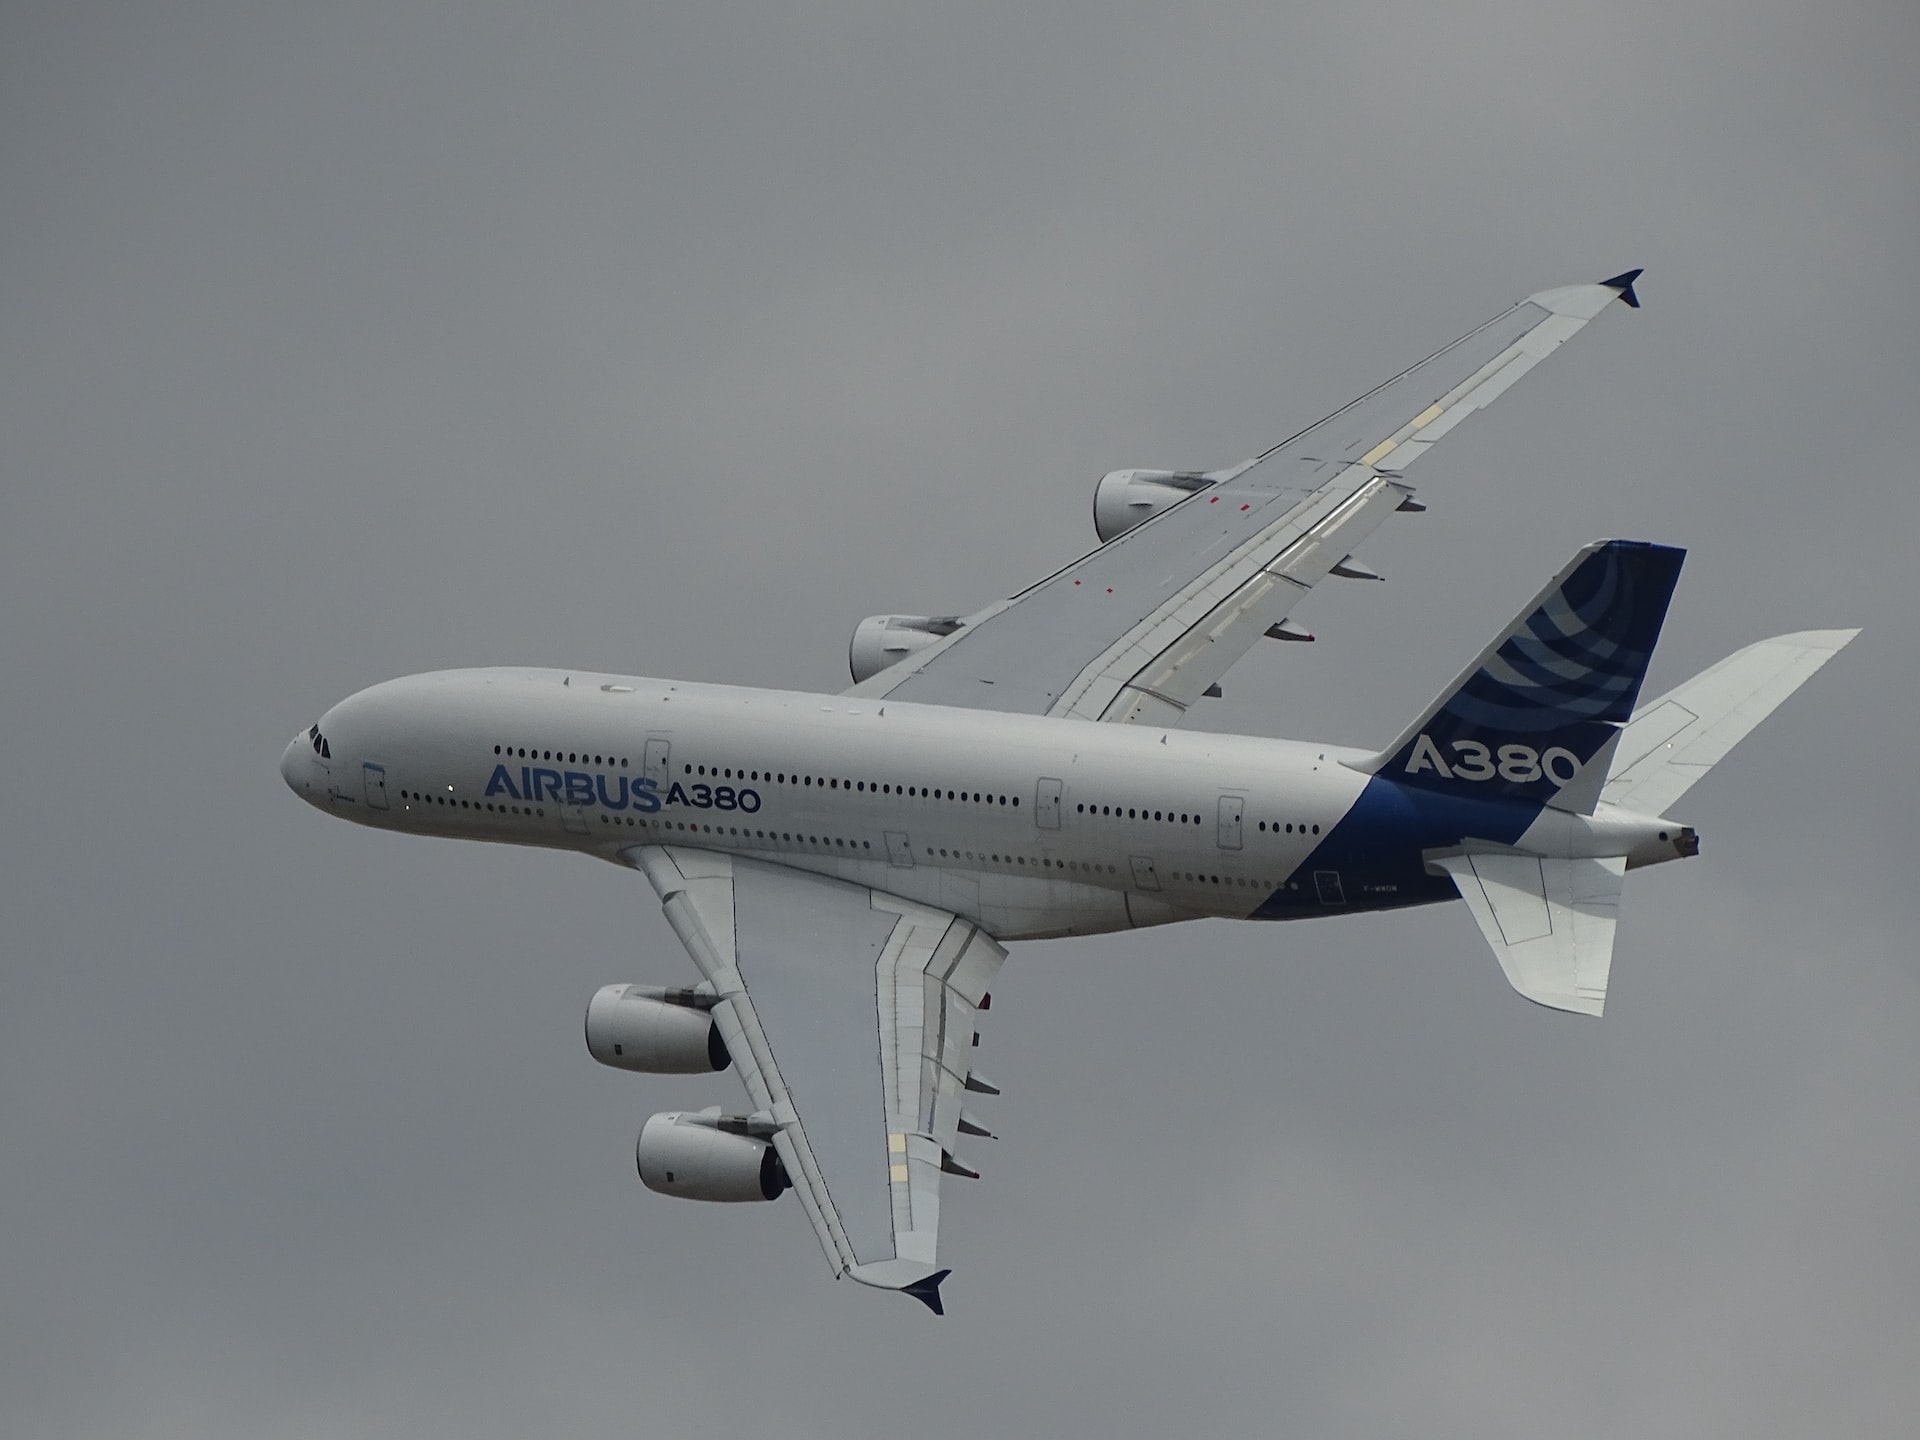 An Airbus A380 commercial aircraft banking in the sky.